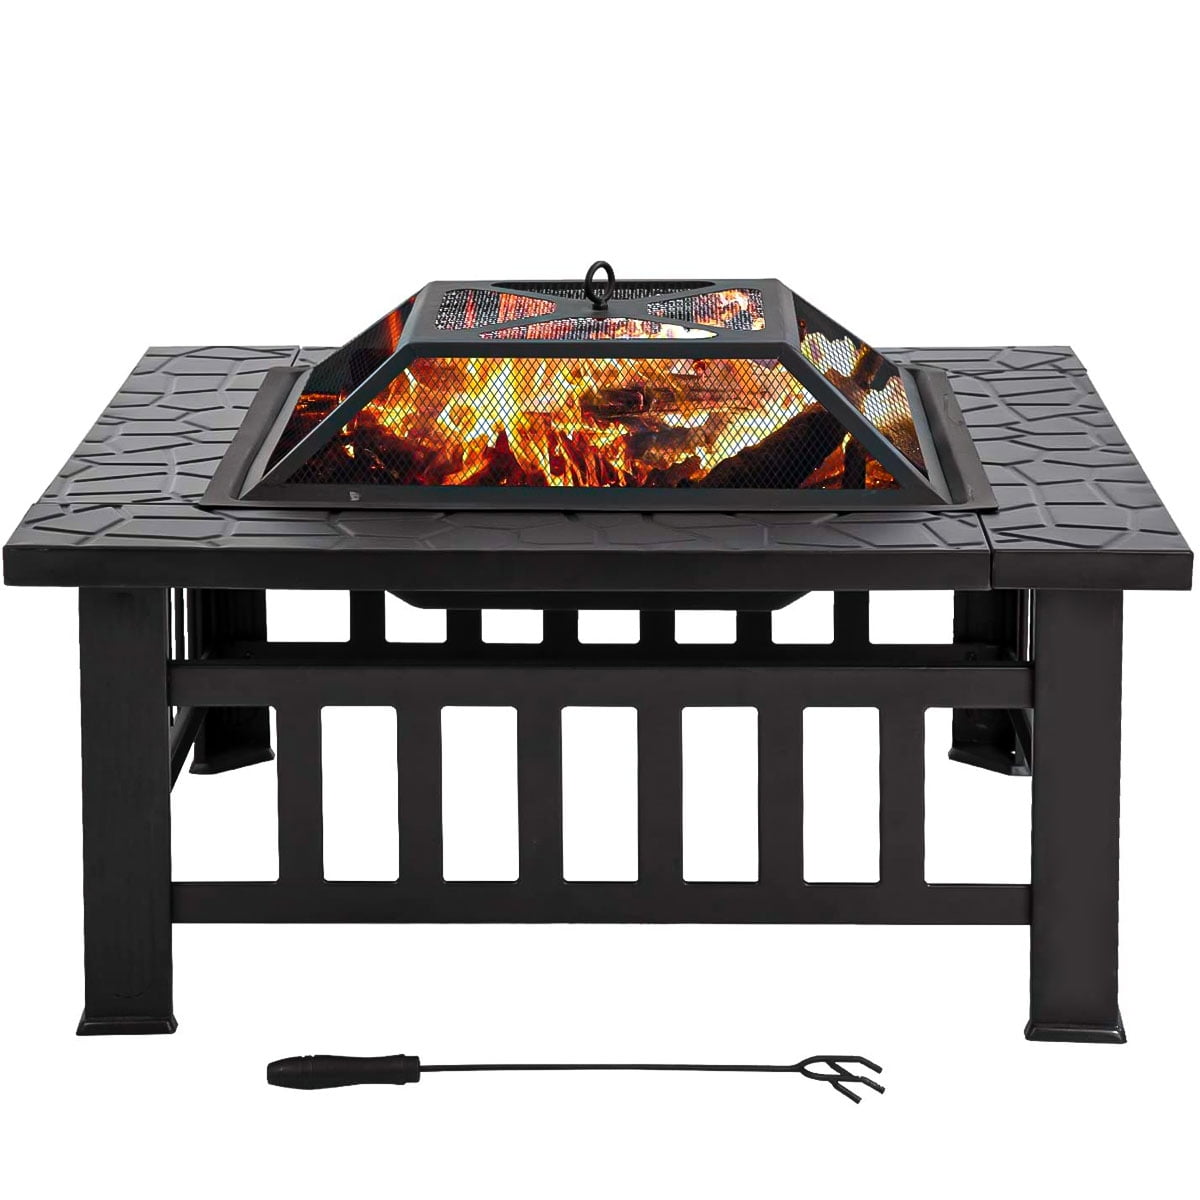 Lovinland Outdoor Fire Pit Metal Patio Stove Square Table Fire Bowel Wood Burning Fireplace with Spark Screen,Poker,Grill 